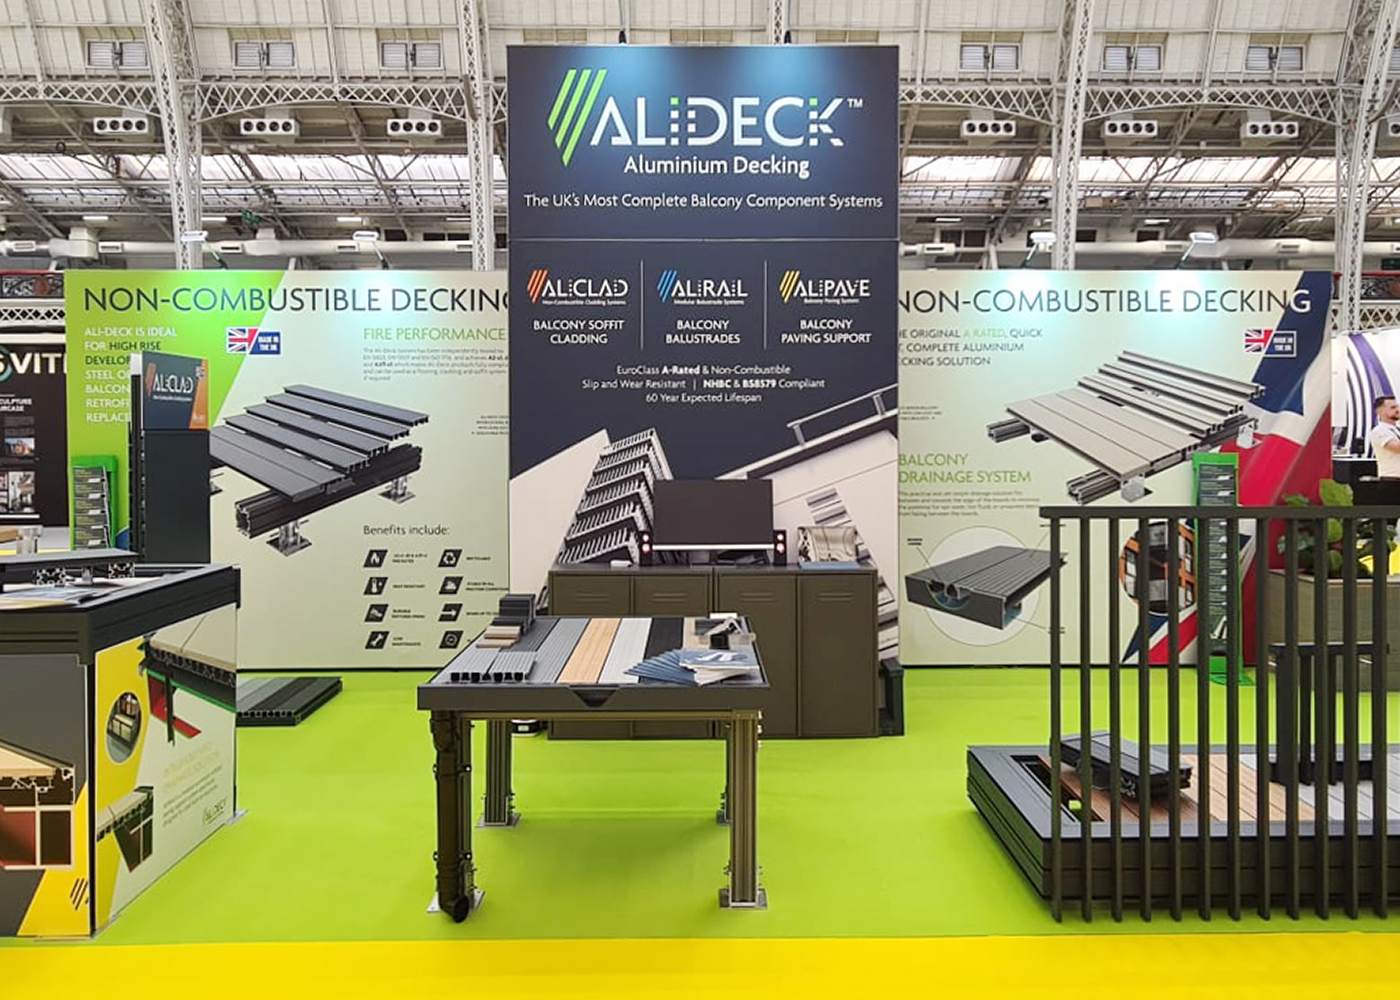 AliDeck exhibit aluminium decking and balcony component systems at London Build 2021